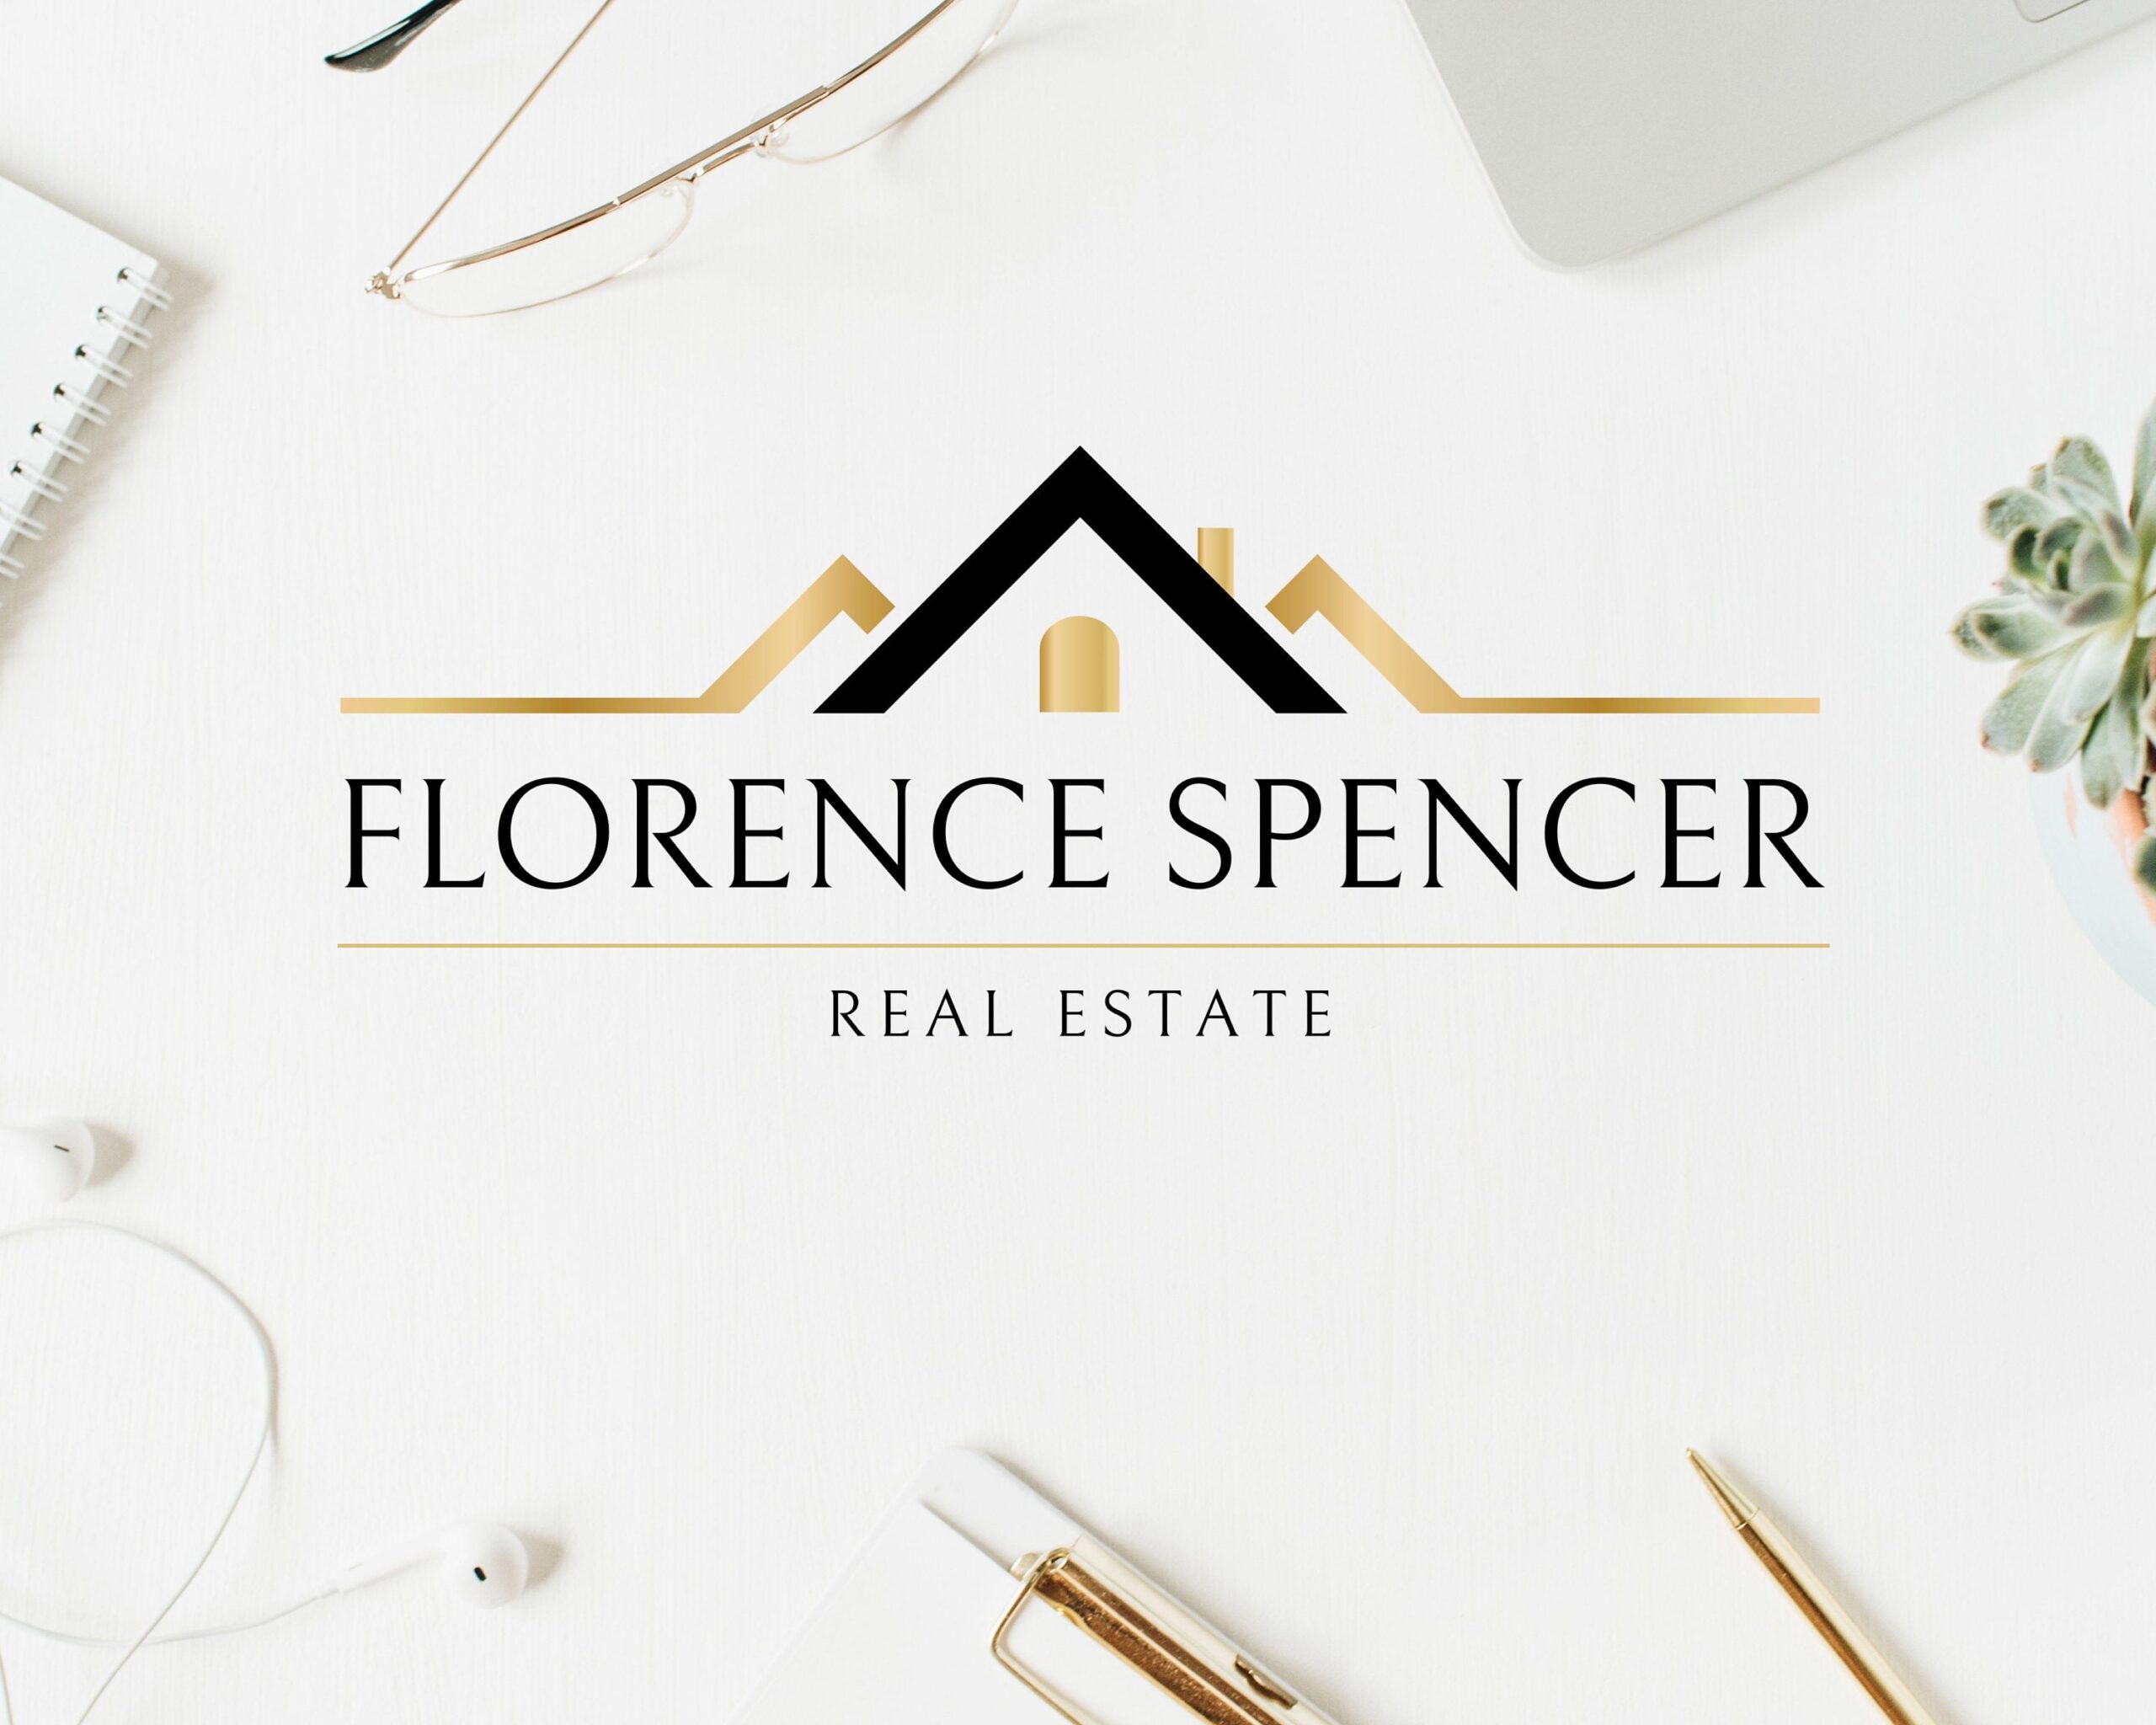 Premade Real Estate Logo - Logo -  Submark Logos and Watermarks - All Designs Included -  High-Quality Branding for Real Estate Agents